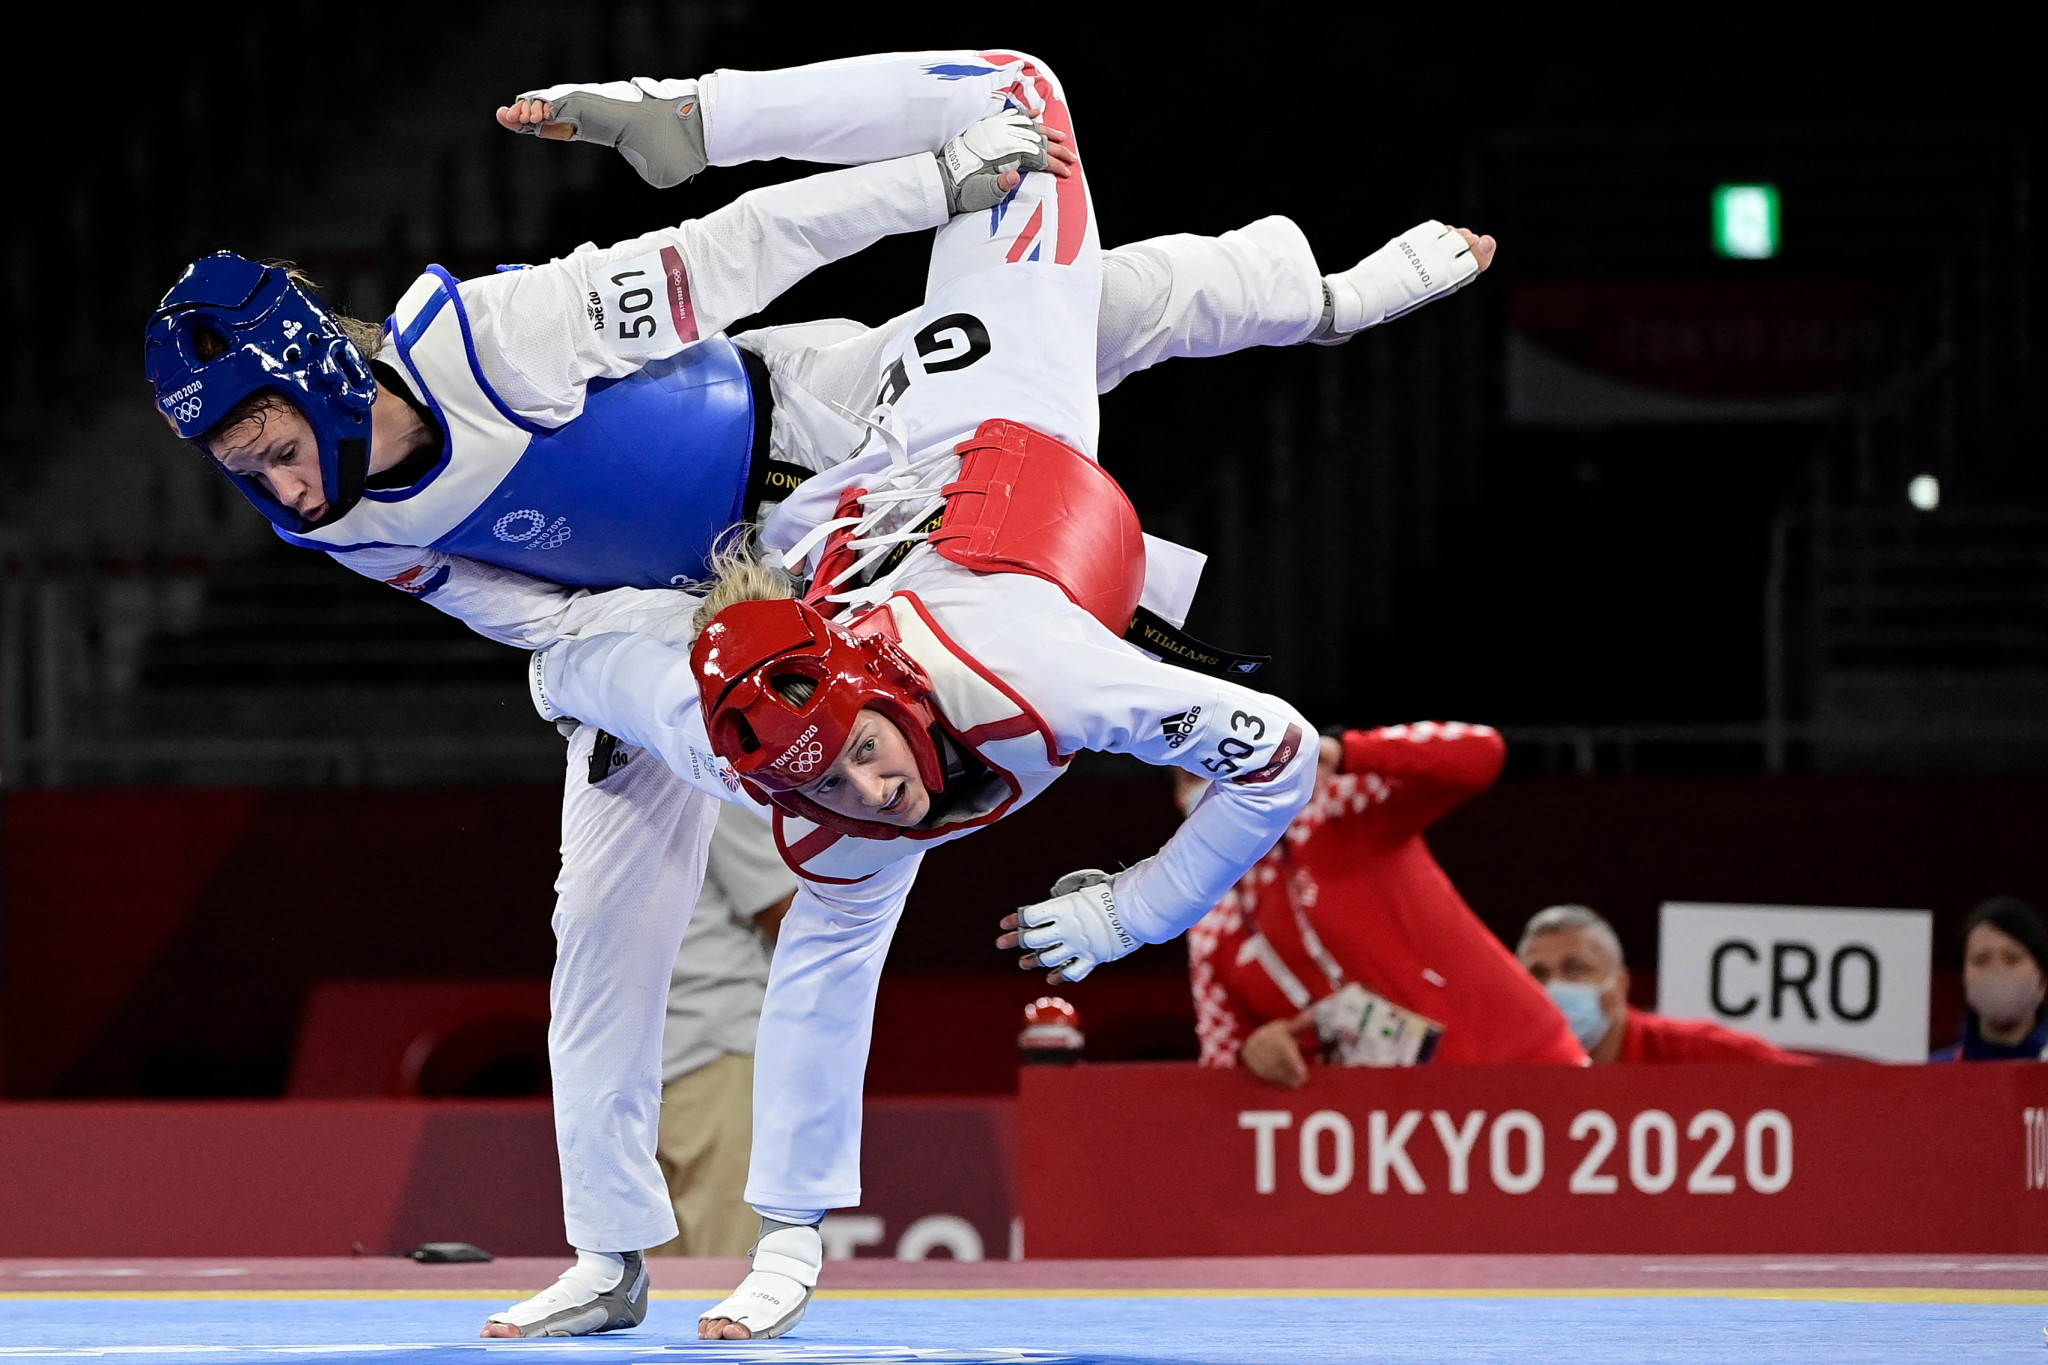 February to April: Three months to qualify for Paris 2024 in taekwondo